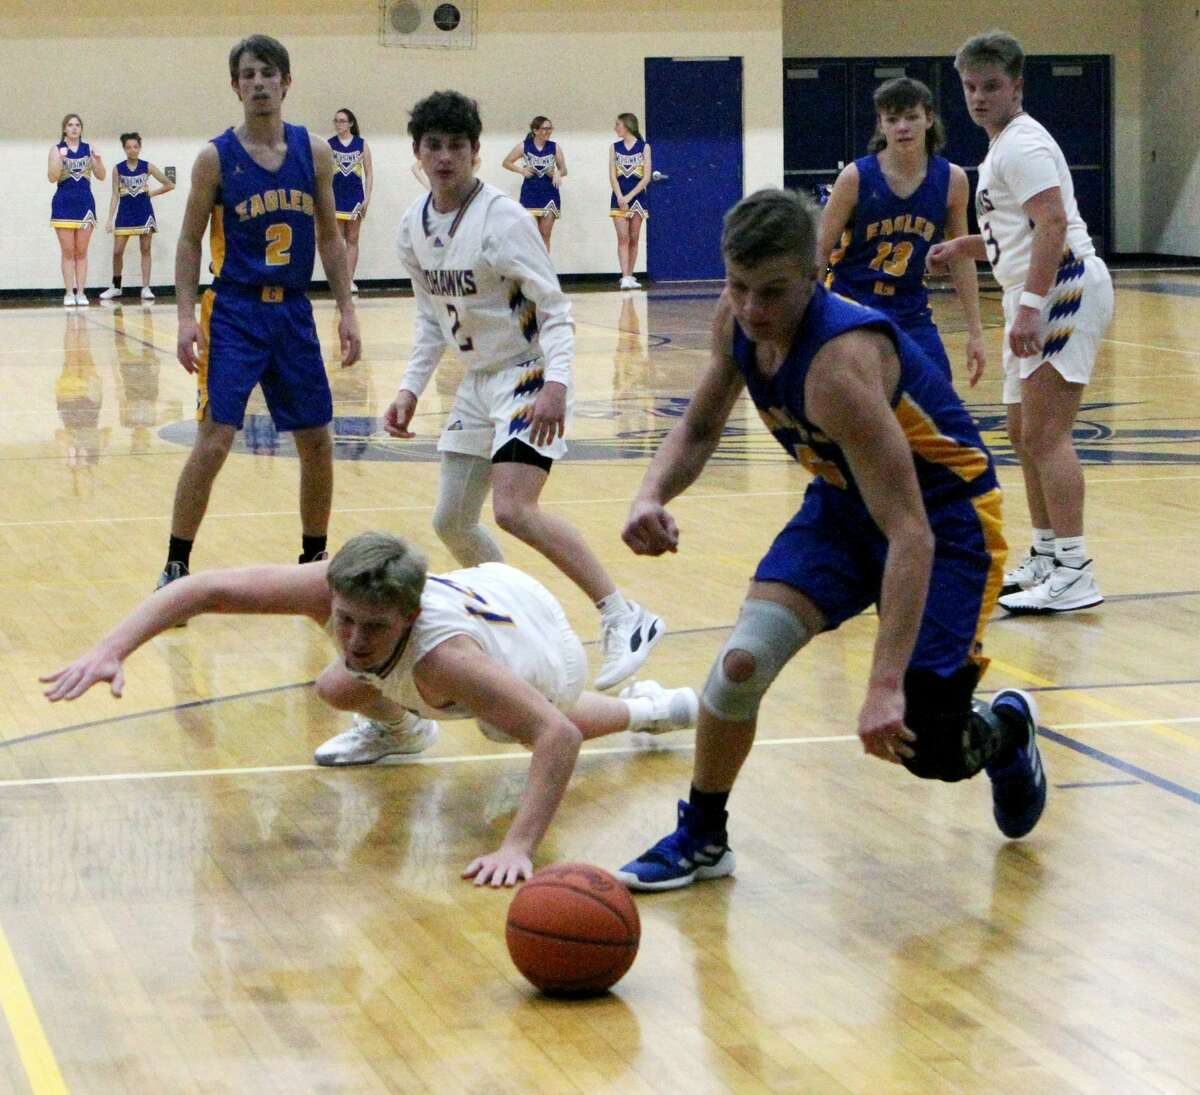 The Morley Stanwood boys basketball team was defeated 39-36 at home by Carson City Crystal on Tuesday evening.